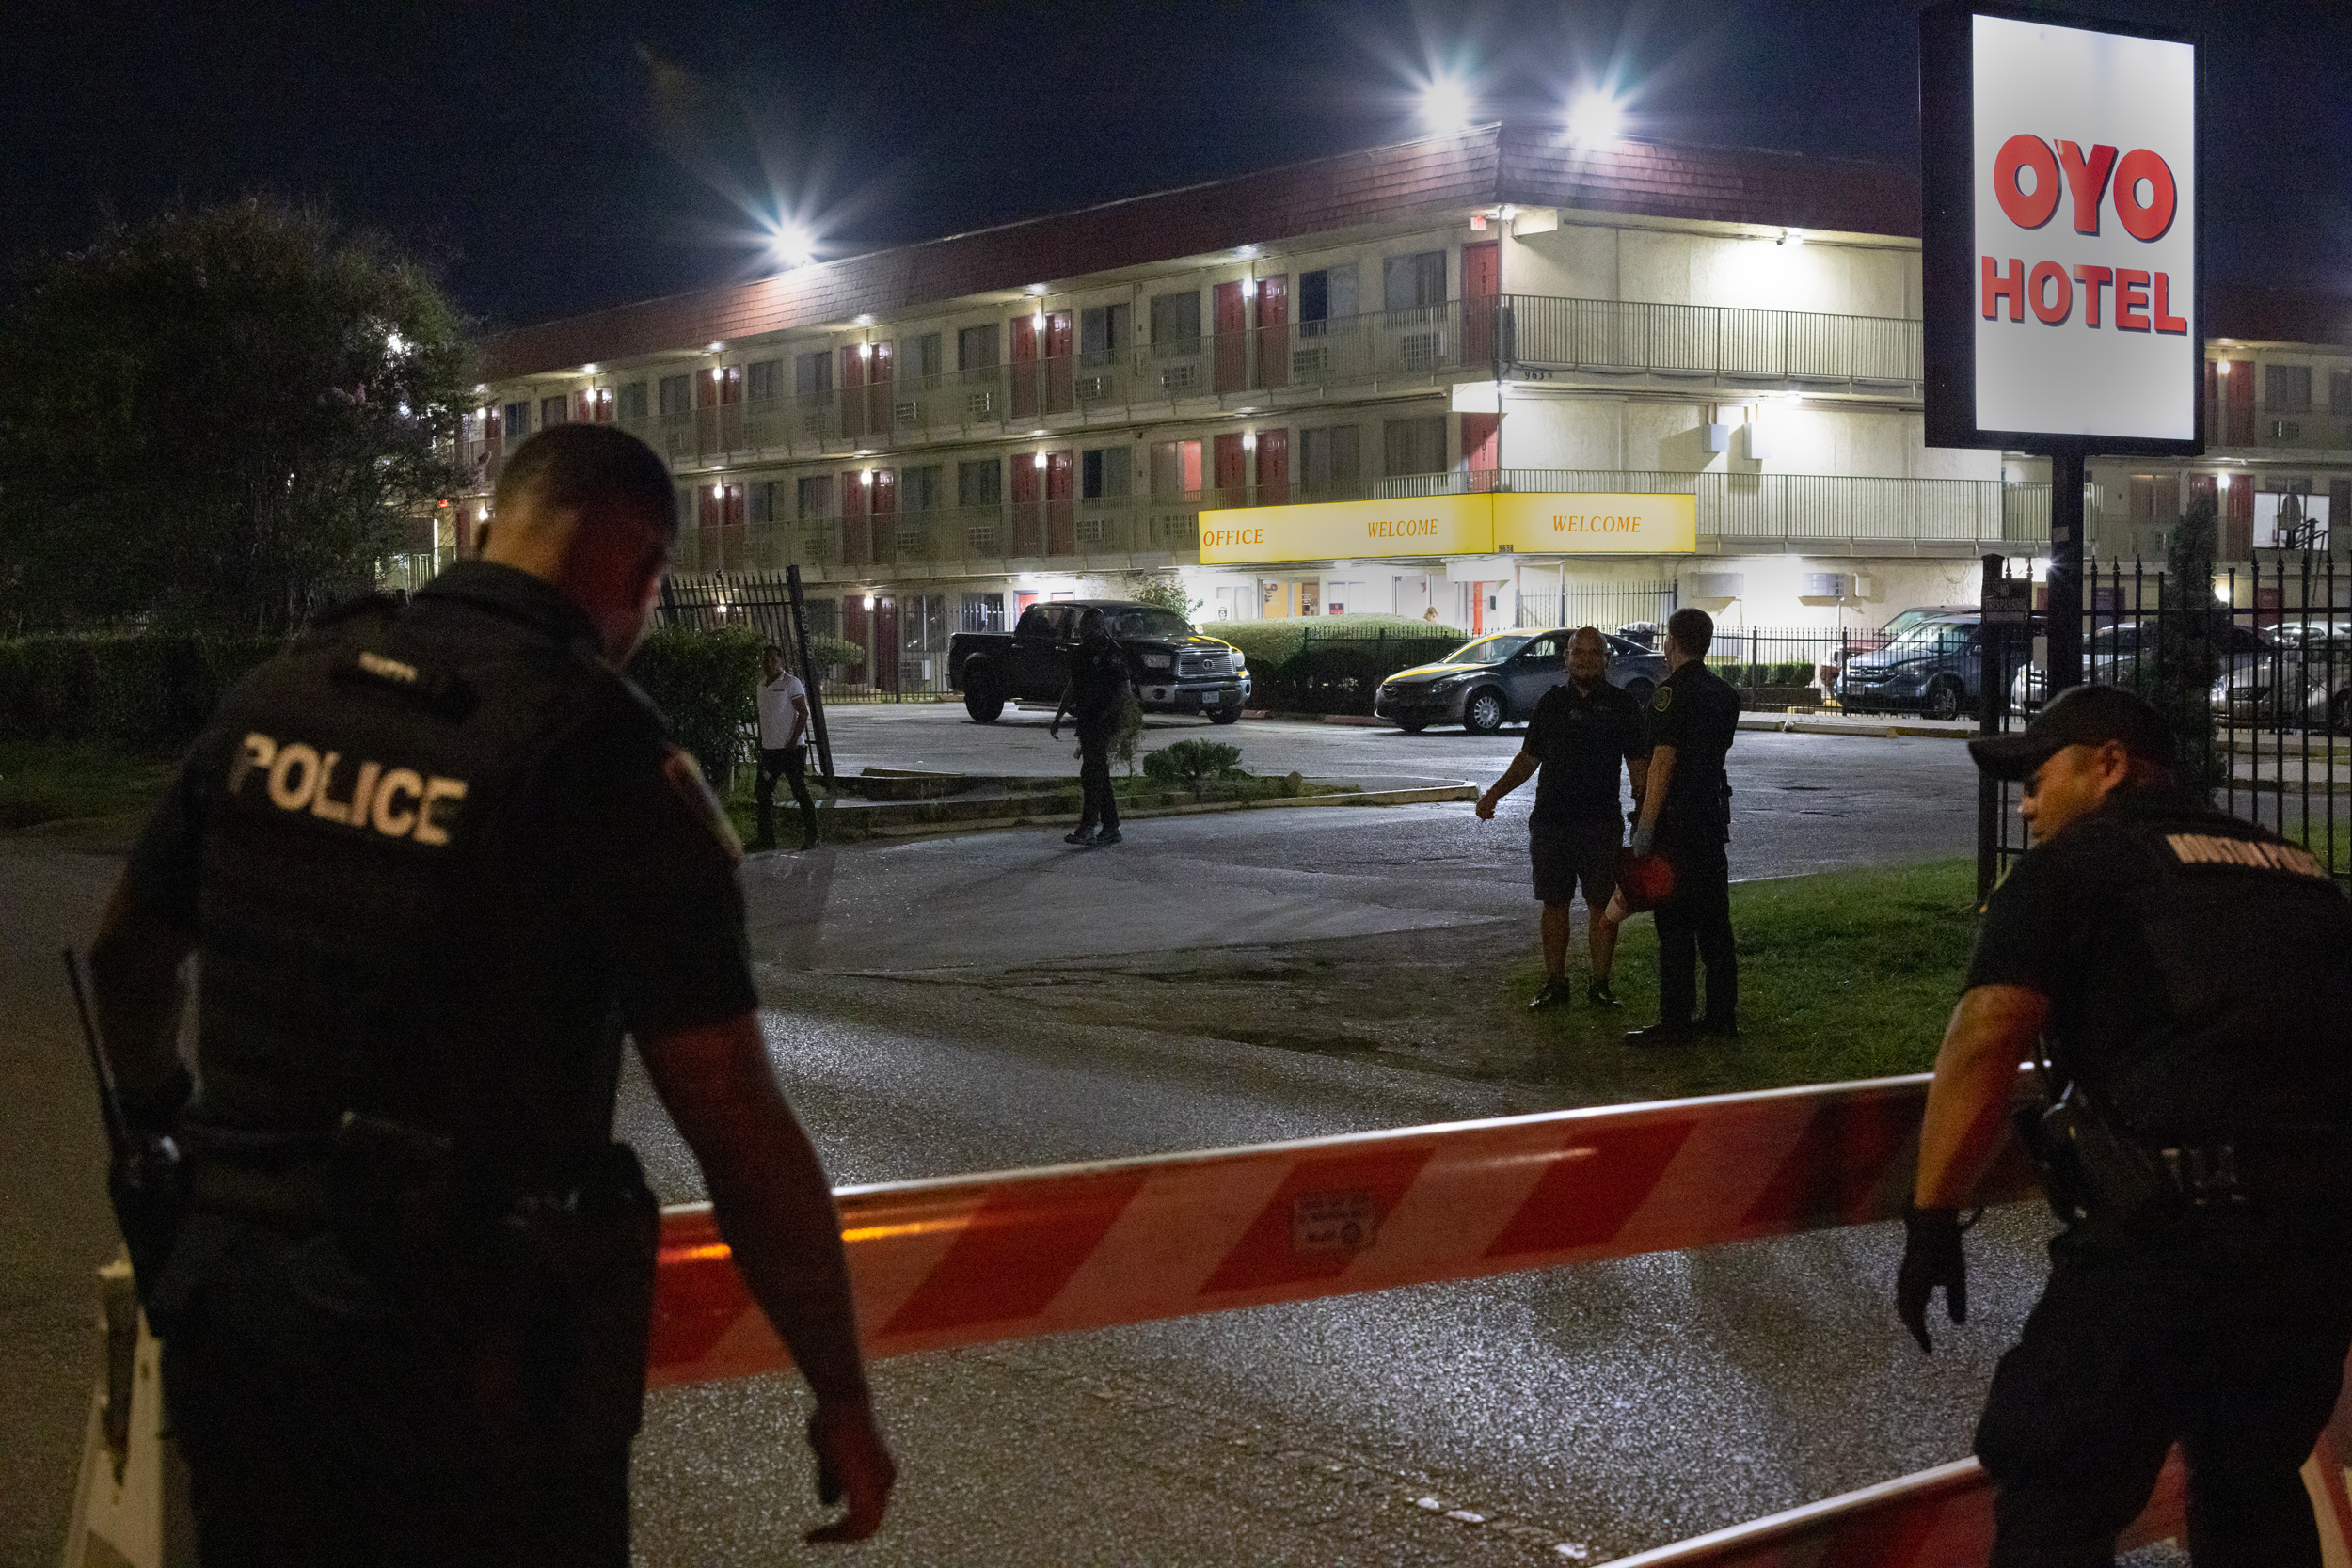 Police officers place barricades to block roads in front of a motel